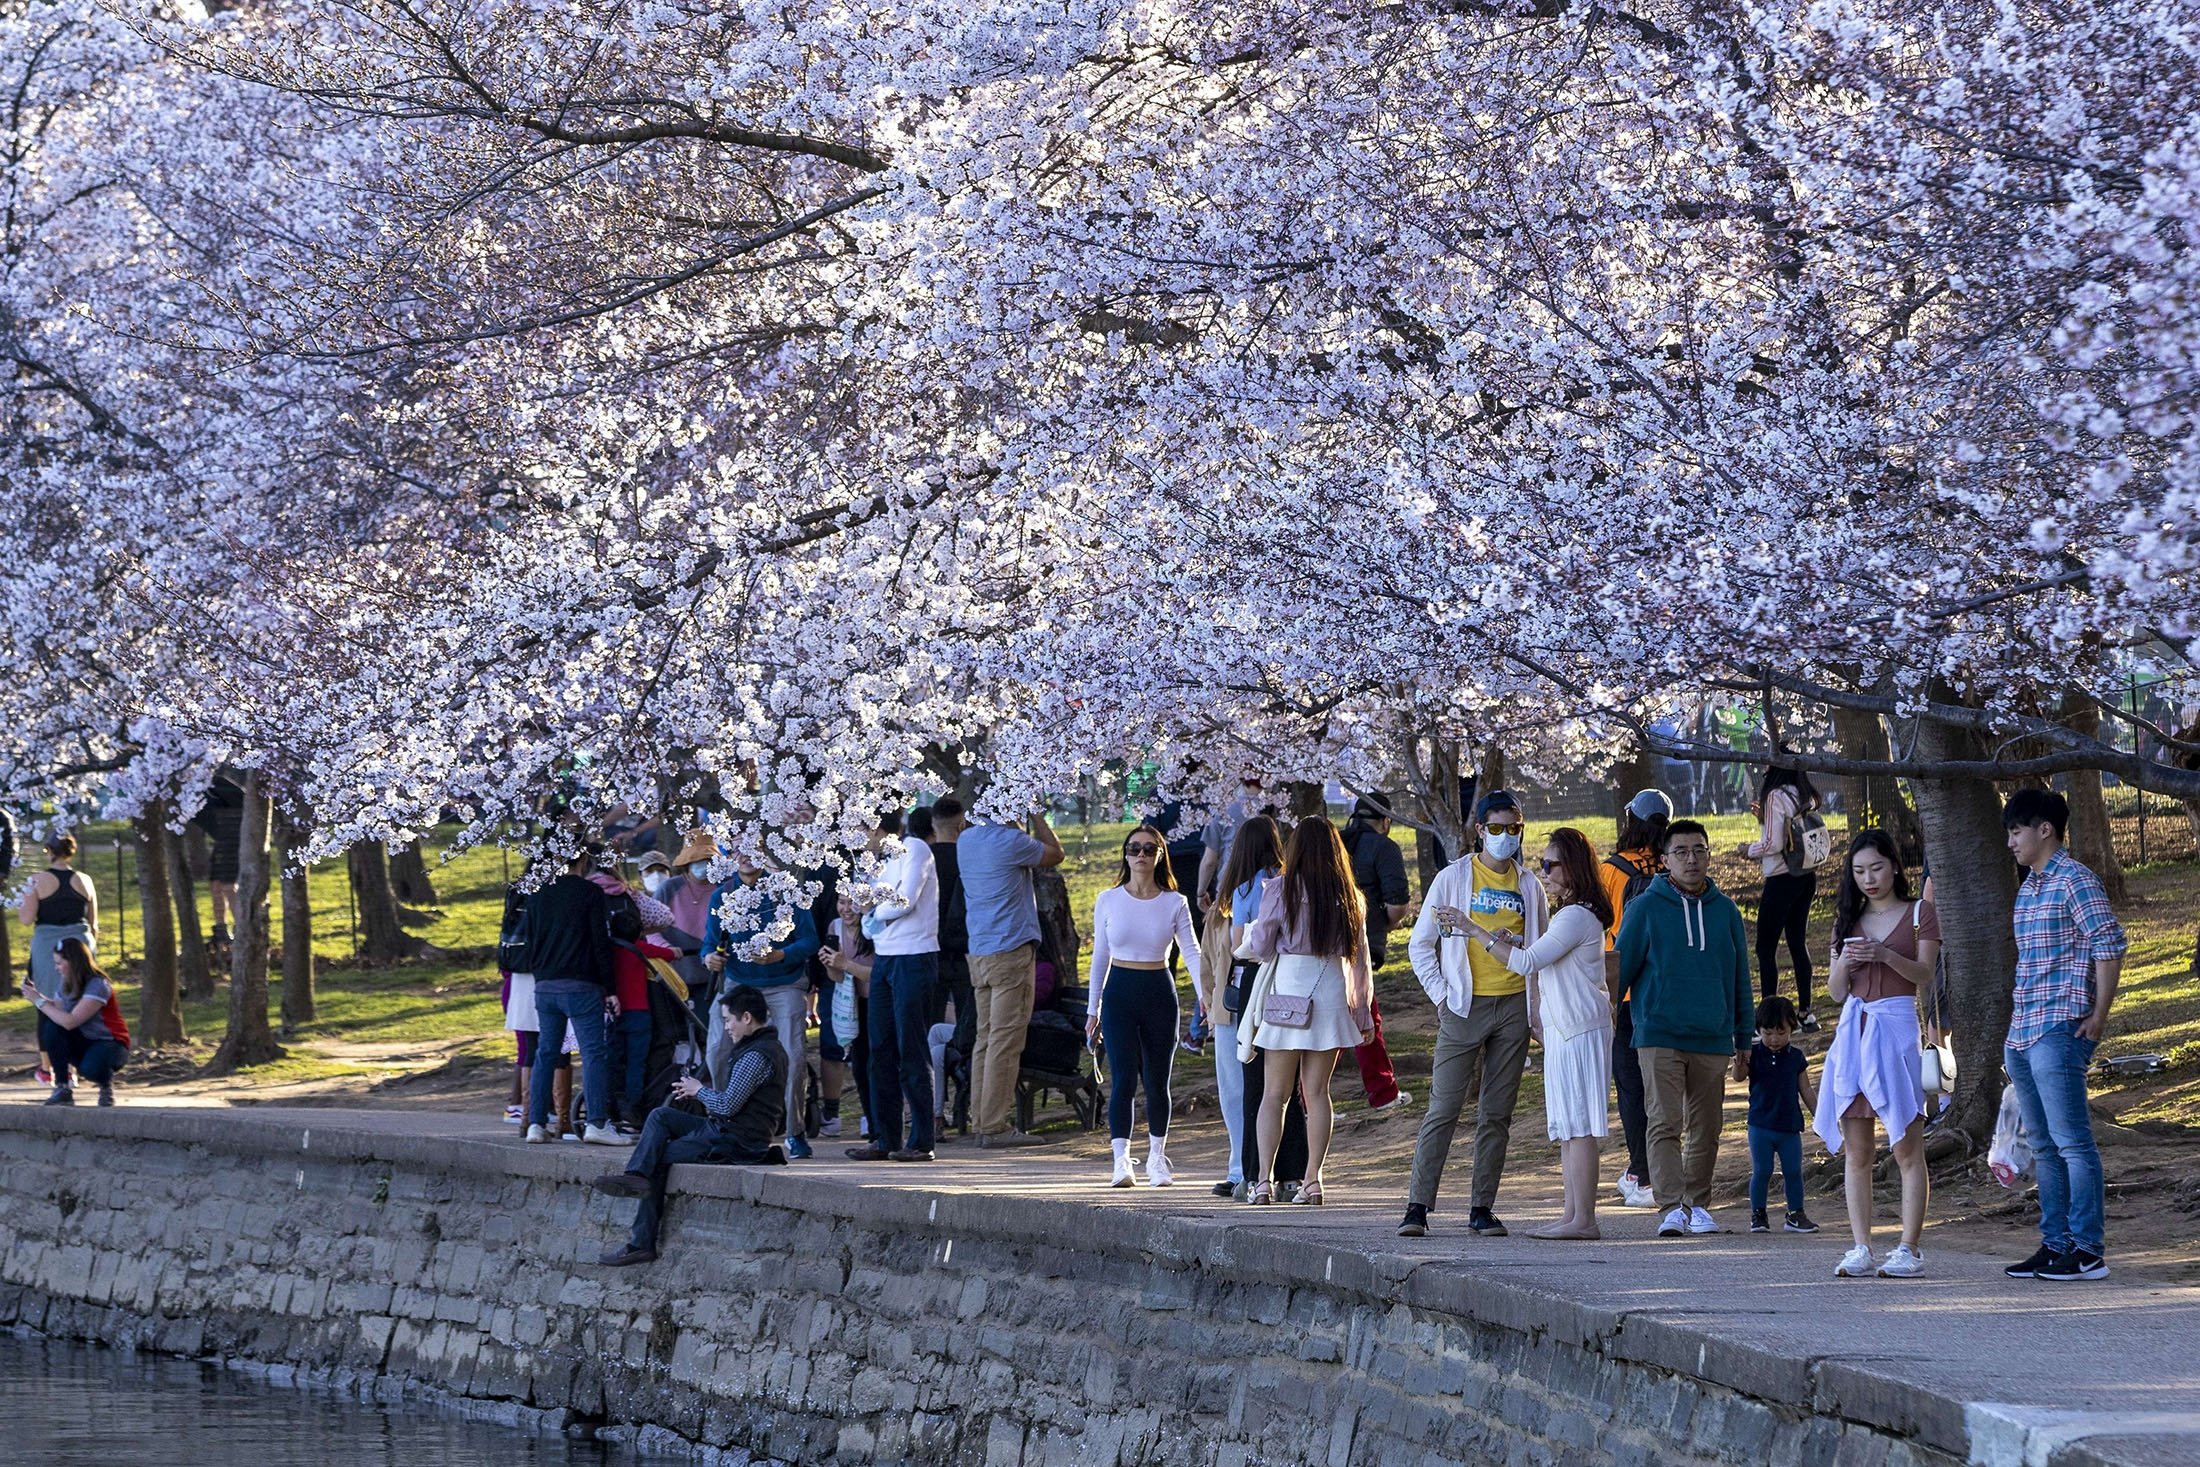 Washington's cherry blossoms in full bloom | Daily Sabah